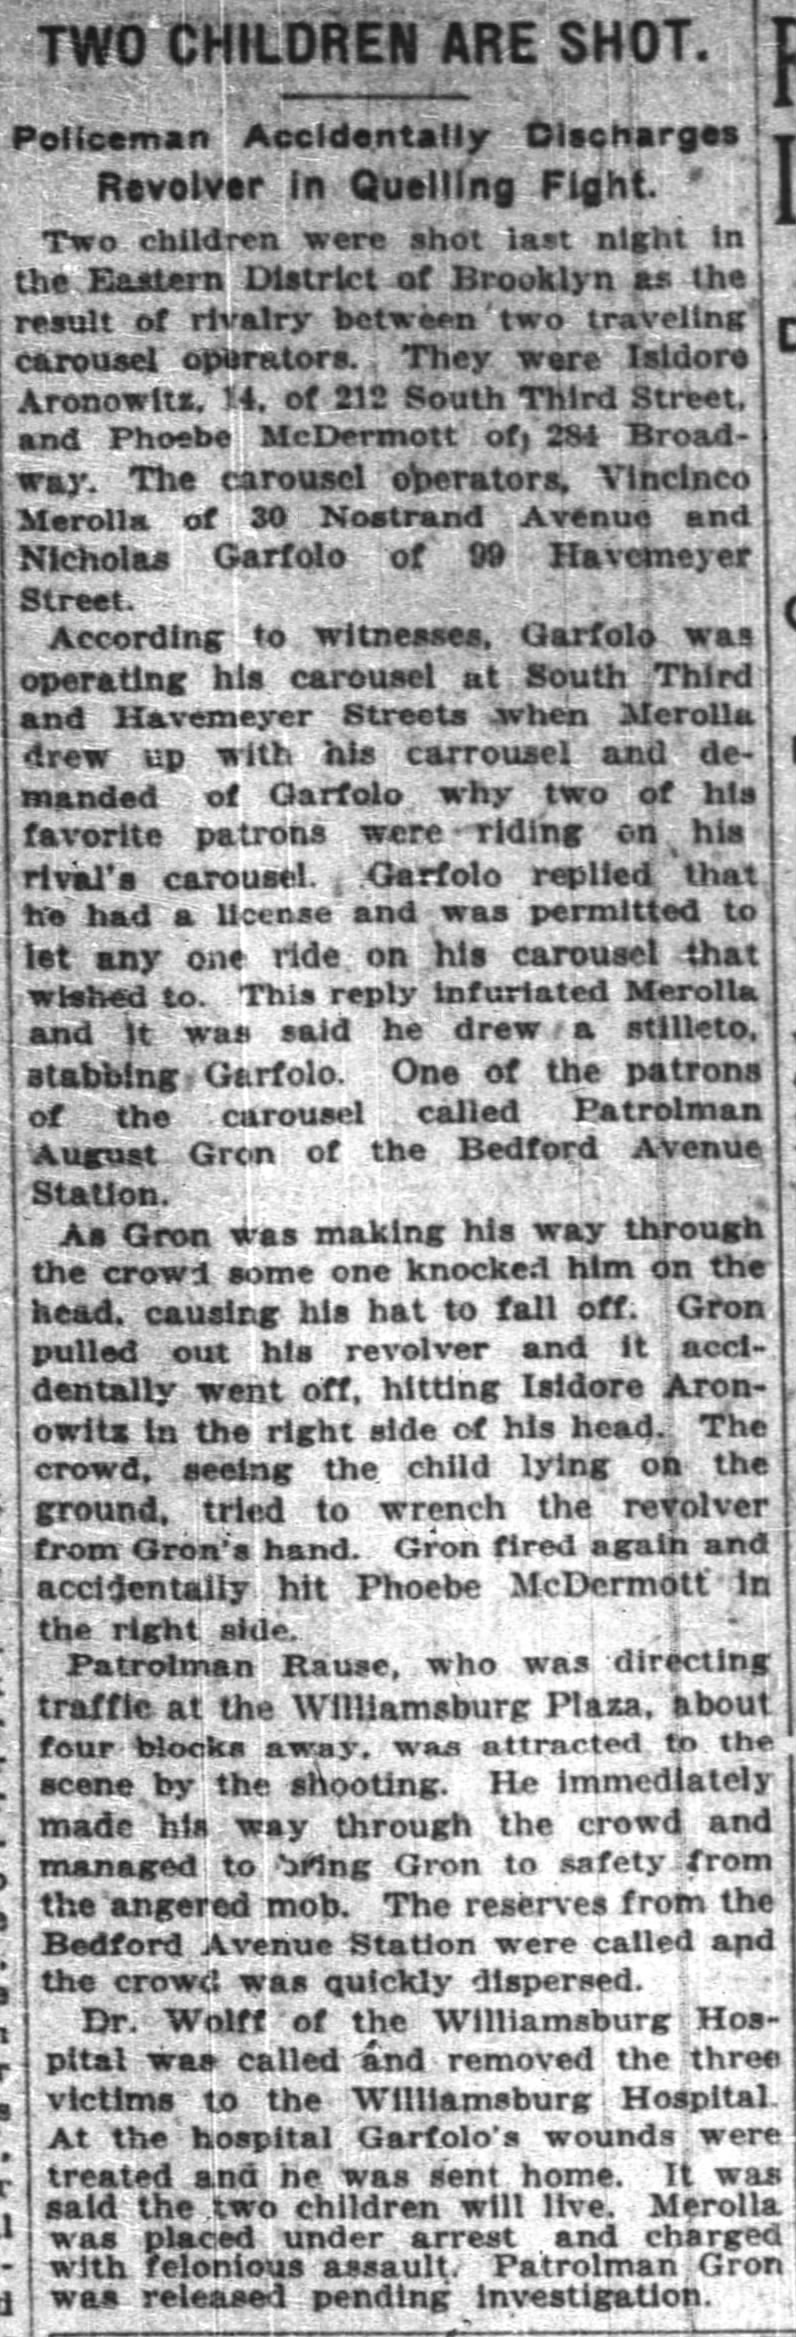 6-6-1919 knifing-2 kids shot due to carousel competition 6-6-1919